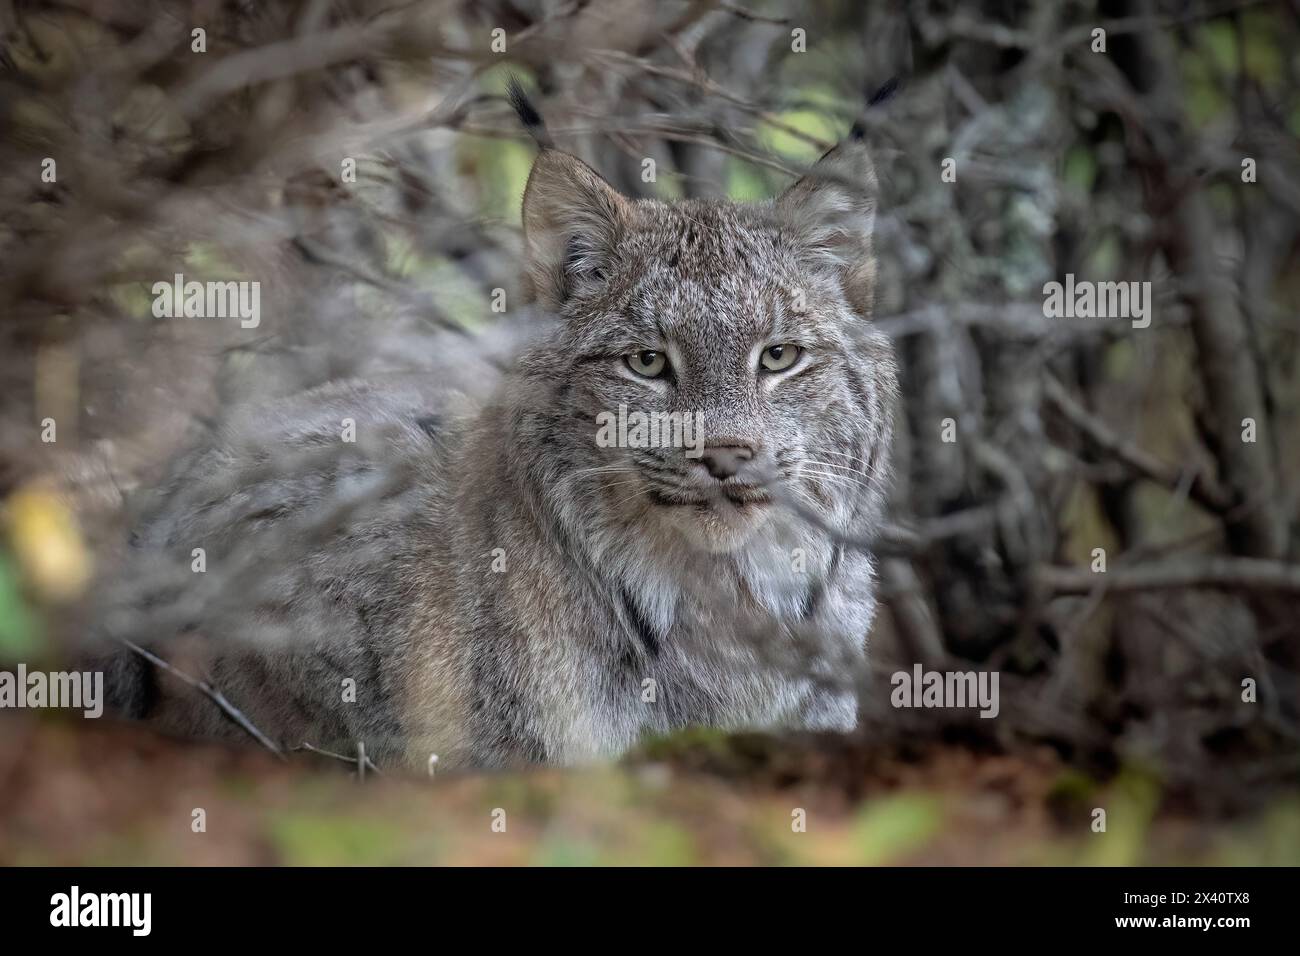 Close-up portrait of a Canada Lynx (Lynx canadensis) looking at the camera through the branches of a Southcentral Alaska alder thicket. Lynx popula... Stock Photo